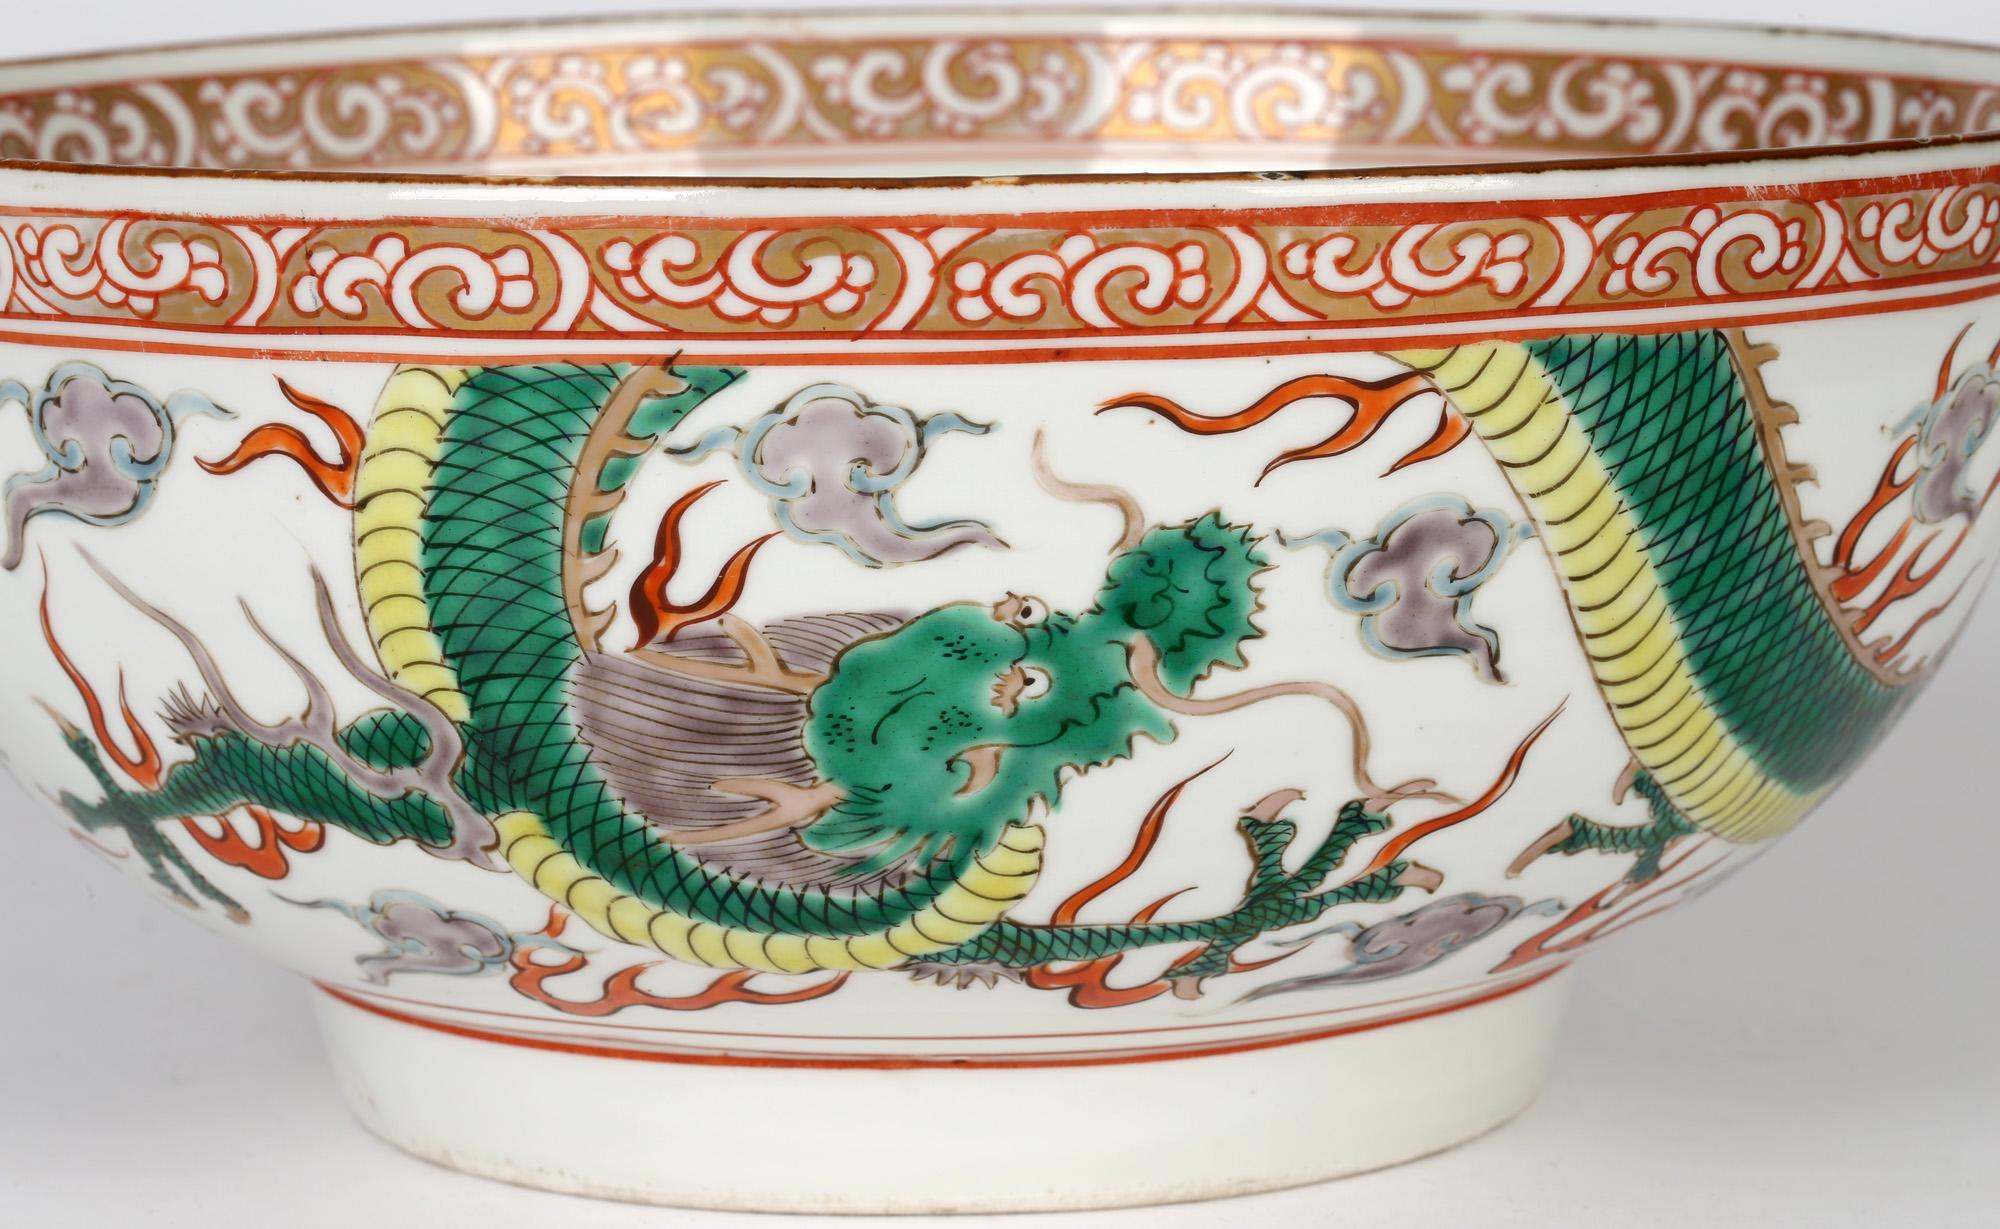 A large and impressive Chinese Qing porcelain punch bowl decorated in the famille verte palette with scrolling dueling dragons and dating from the early to mid 19th century. The bowl stands raised on a narrow rounded foot and is hand decorated in